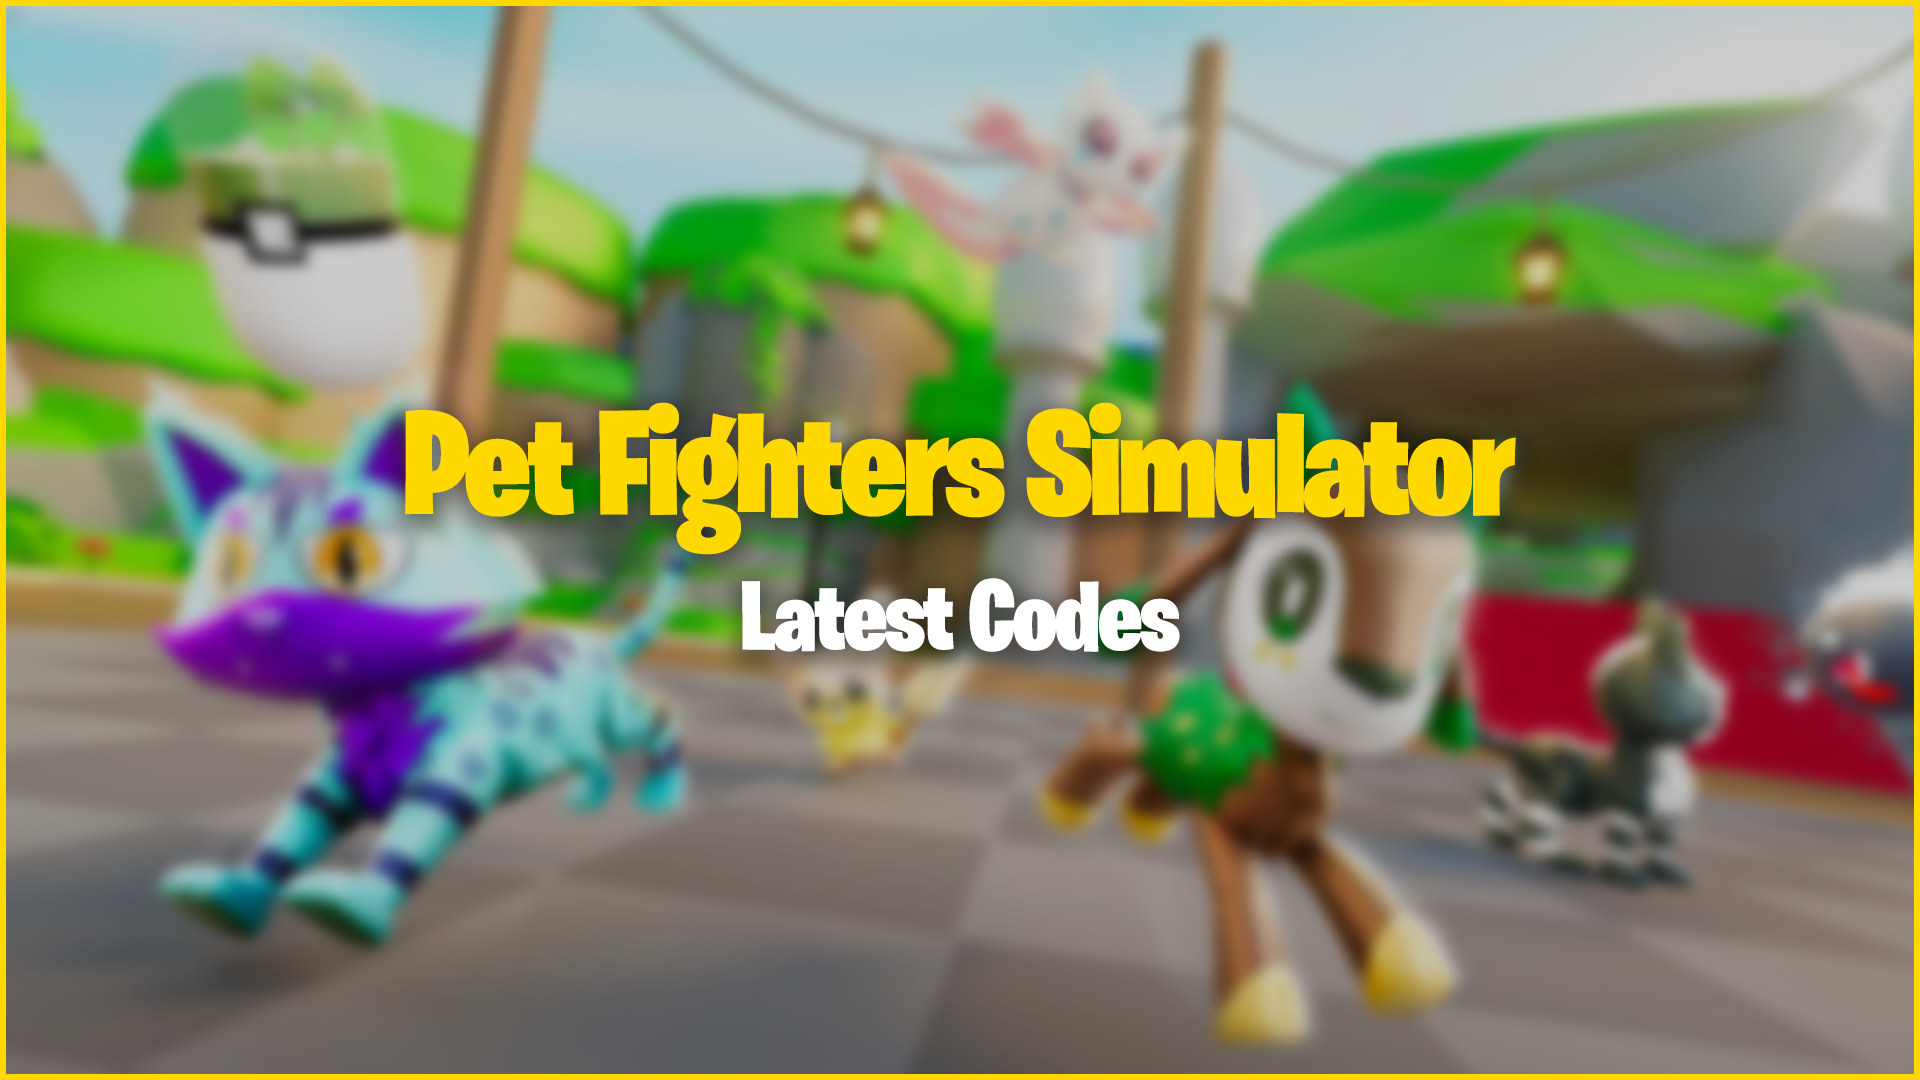 Pet Fighting Simulator codes. Pet Simulator z codes. Коды в Pet Simulator 2023. Коды ПЭТ симулятор 2023 год. Collect all pets codes